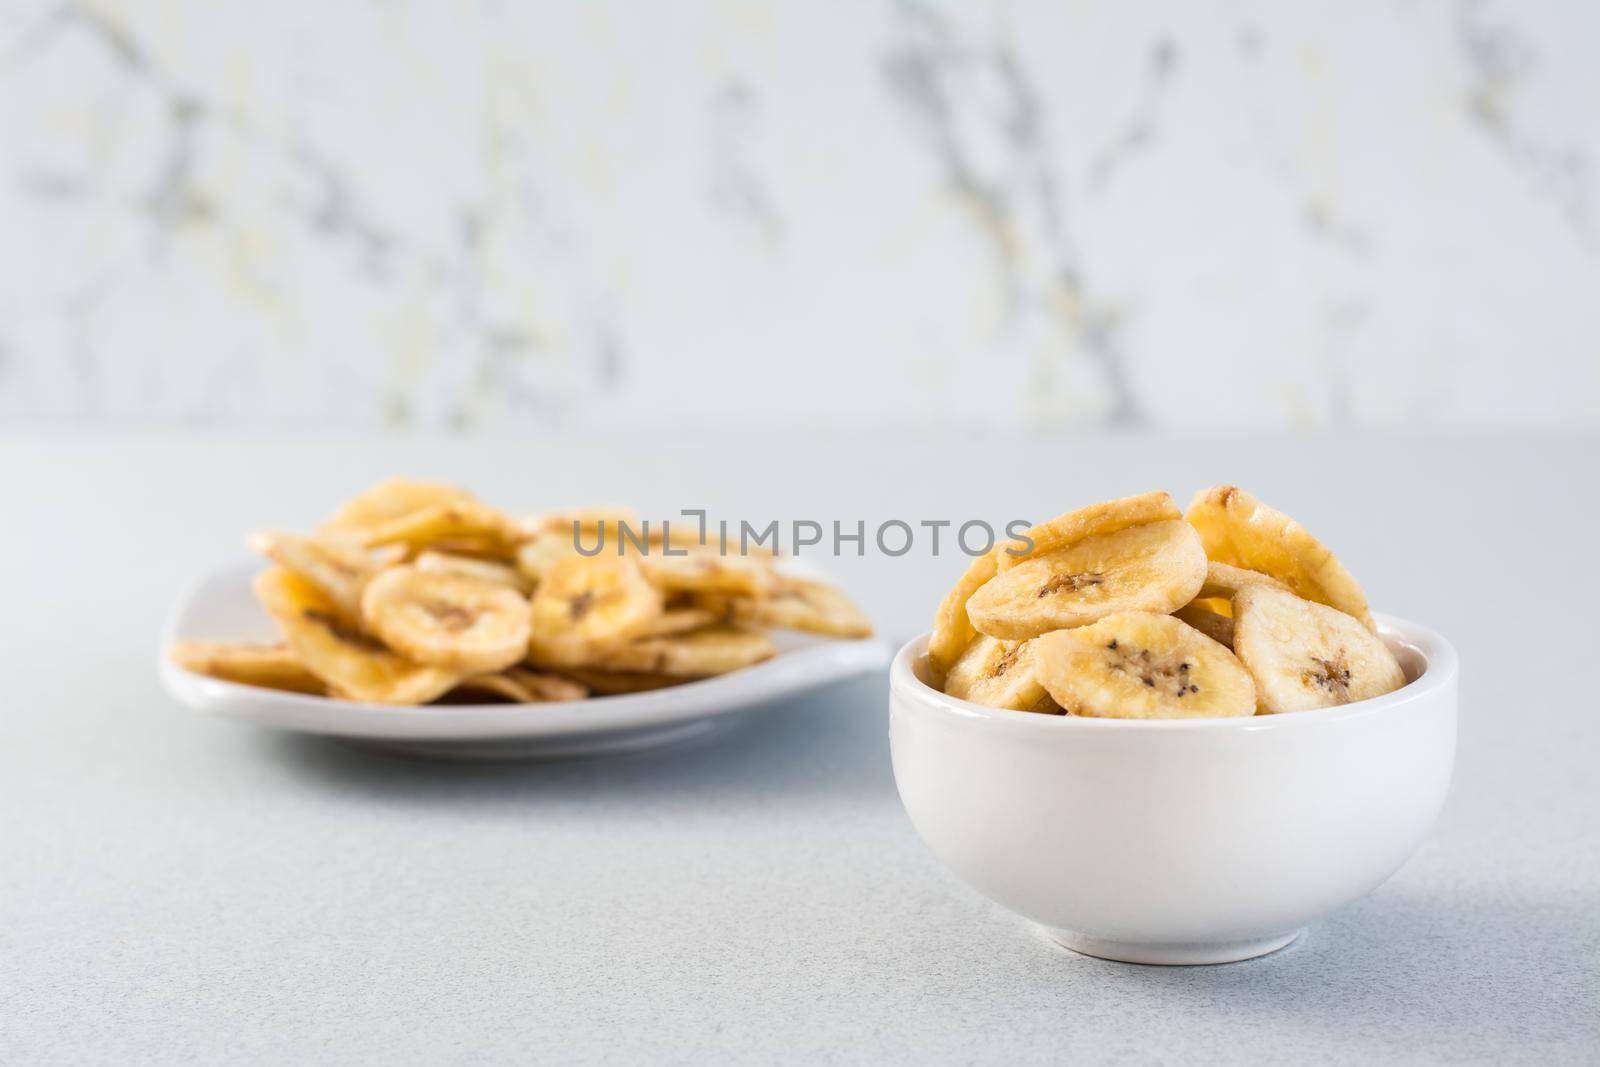 Baked banana chips in a white bowl and saucer on the table. Fast food. Copy space by Aleruana